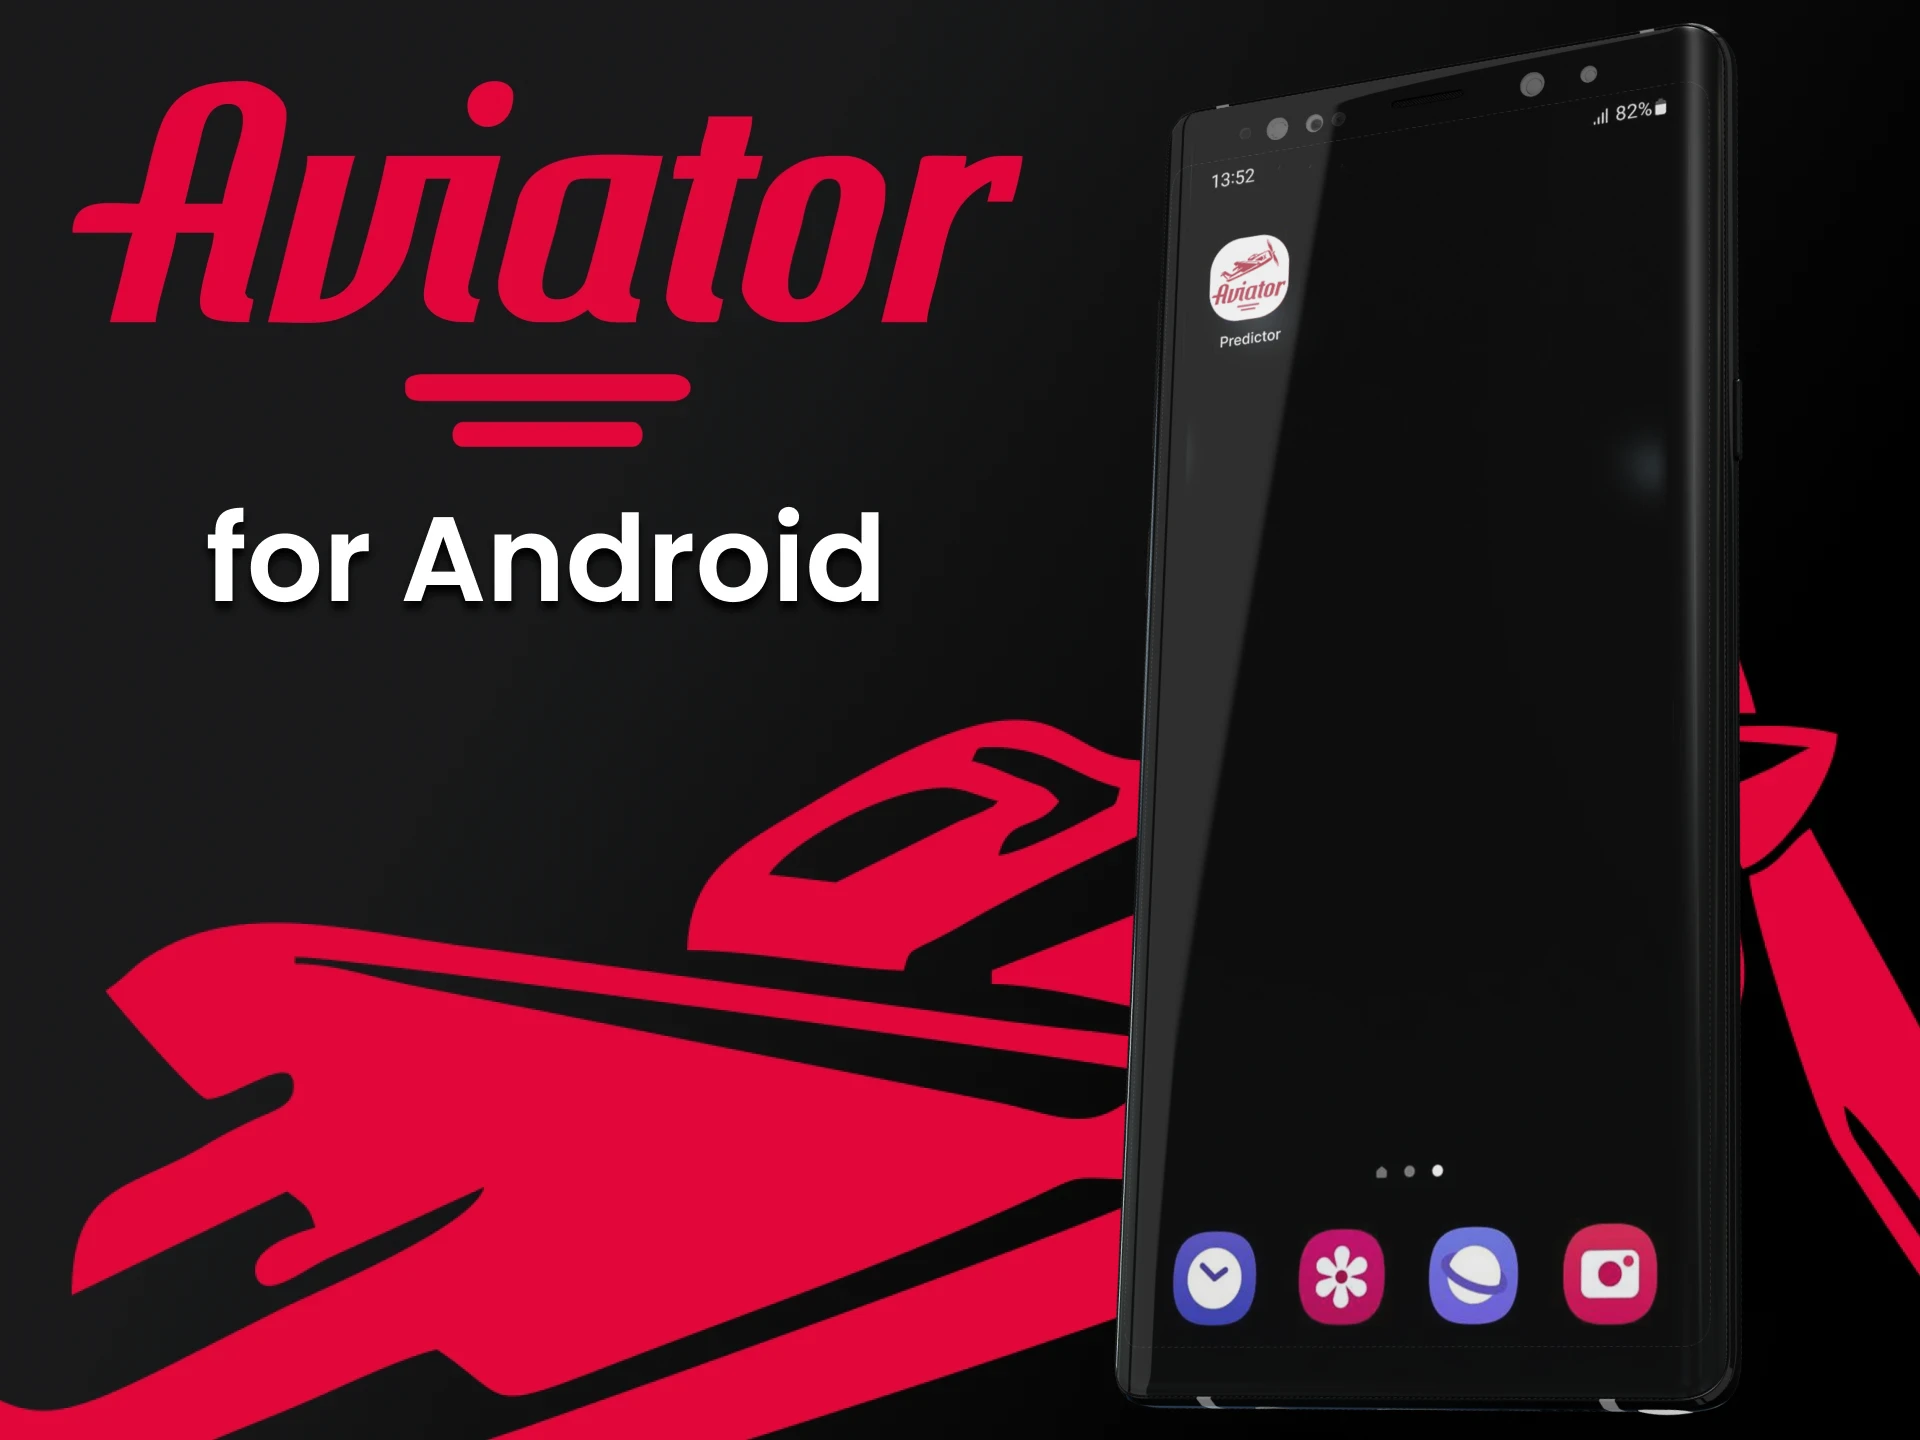 You can use software to play Aviator on an Android device.